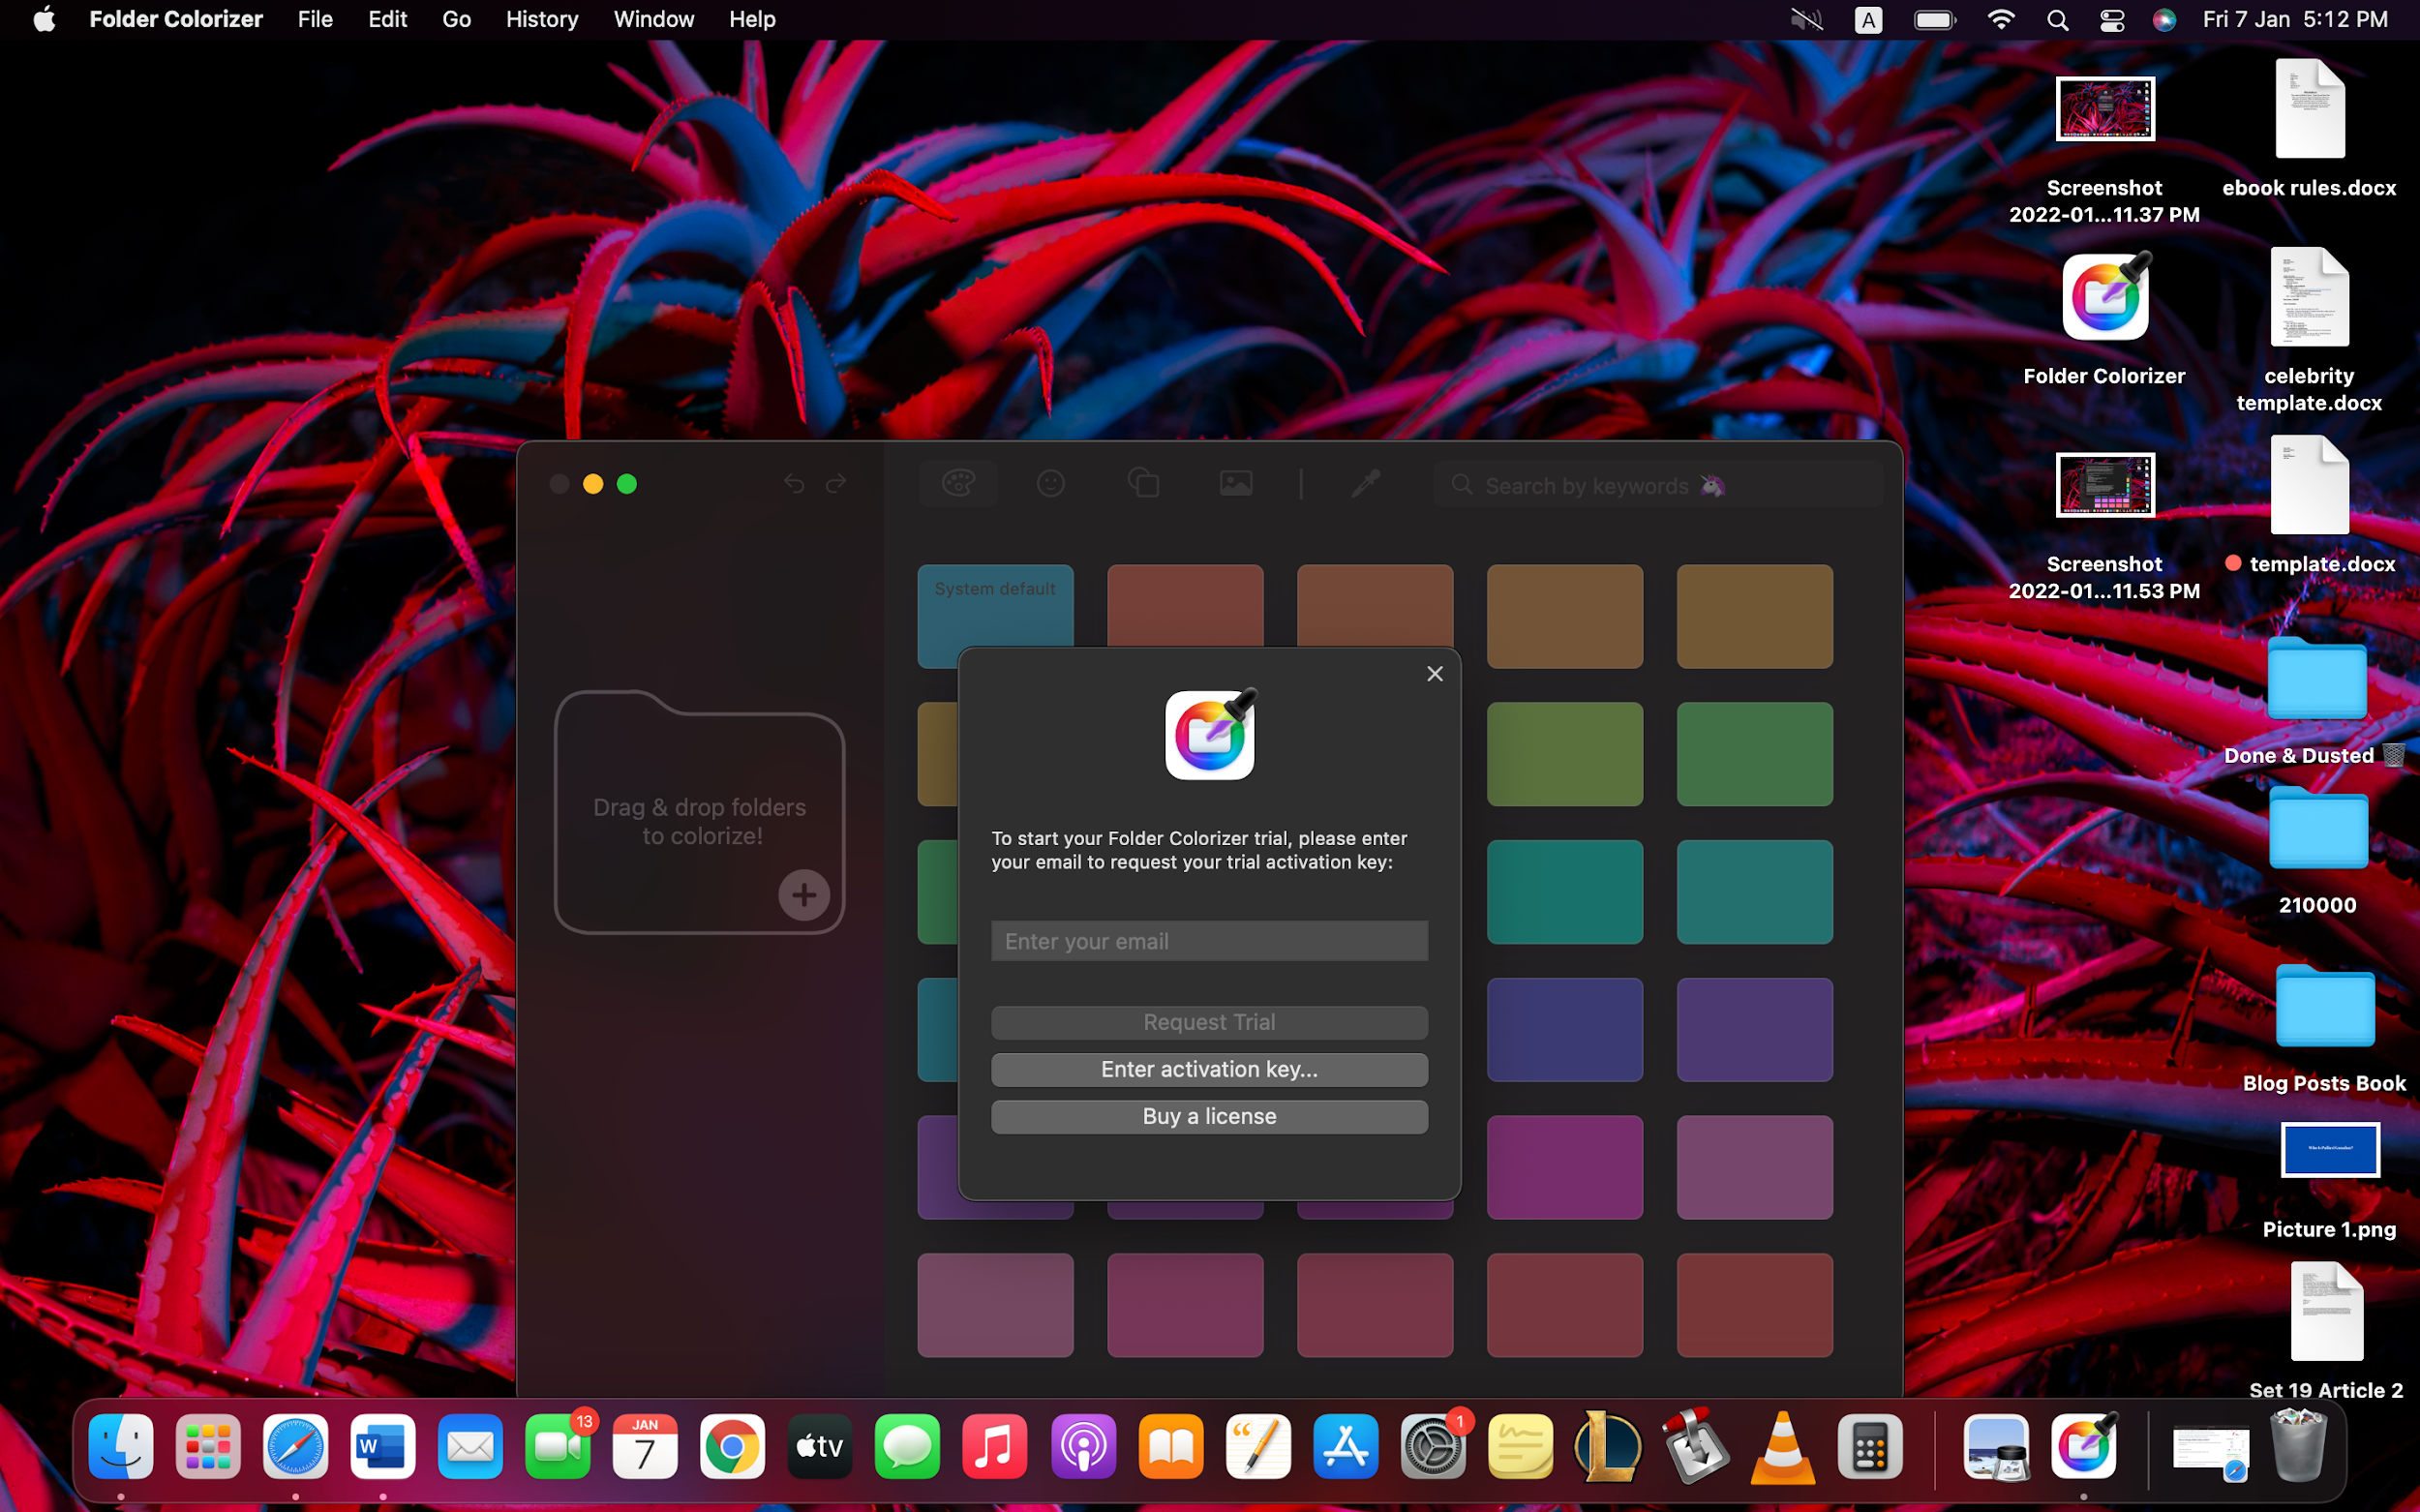 Download and Install Folder Colorizer for Mac